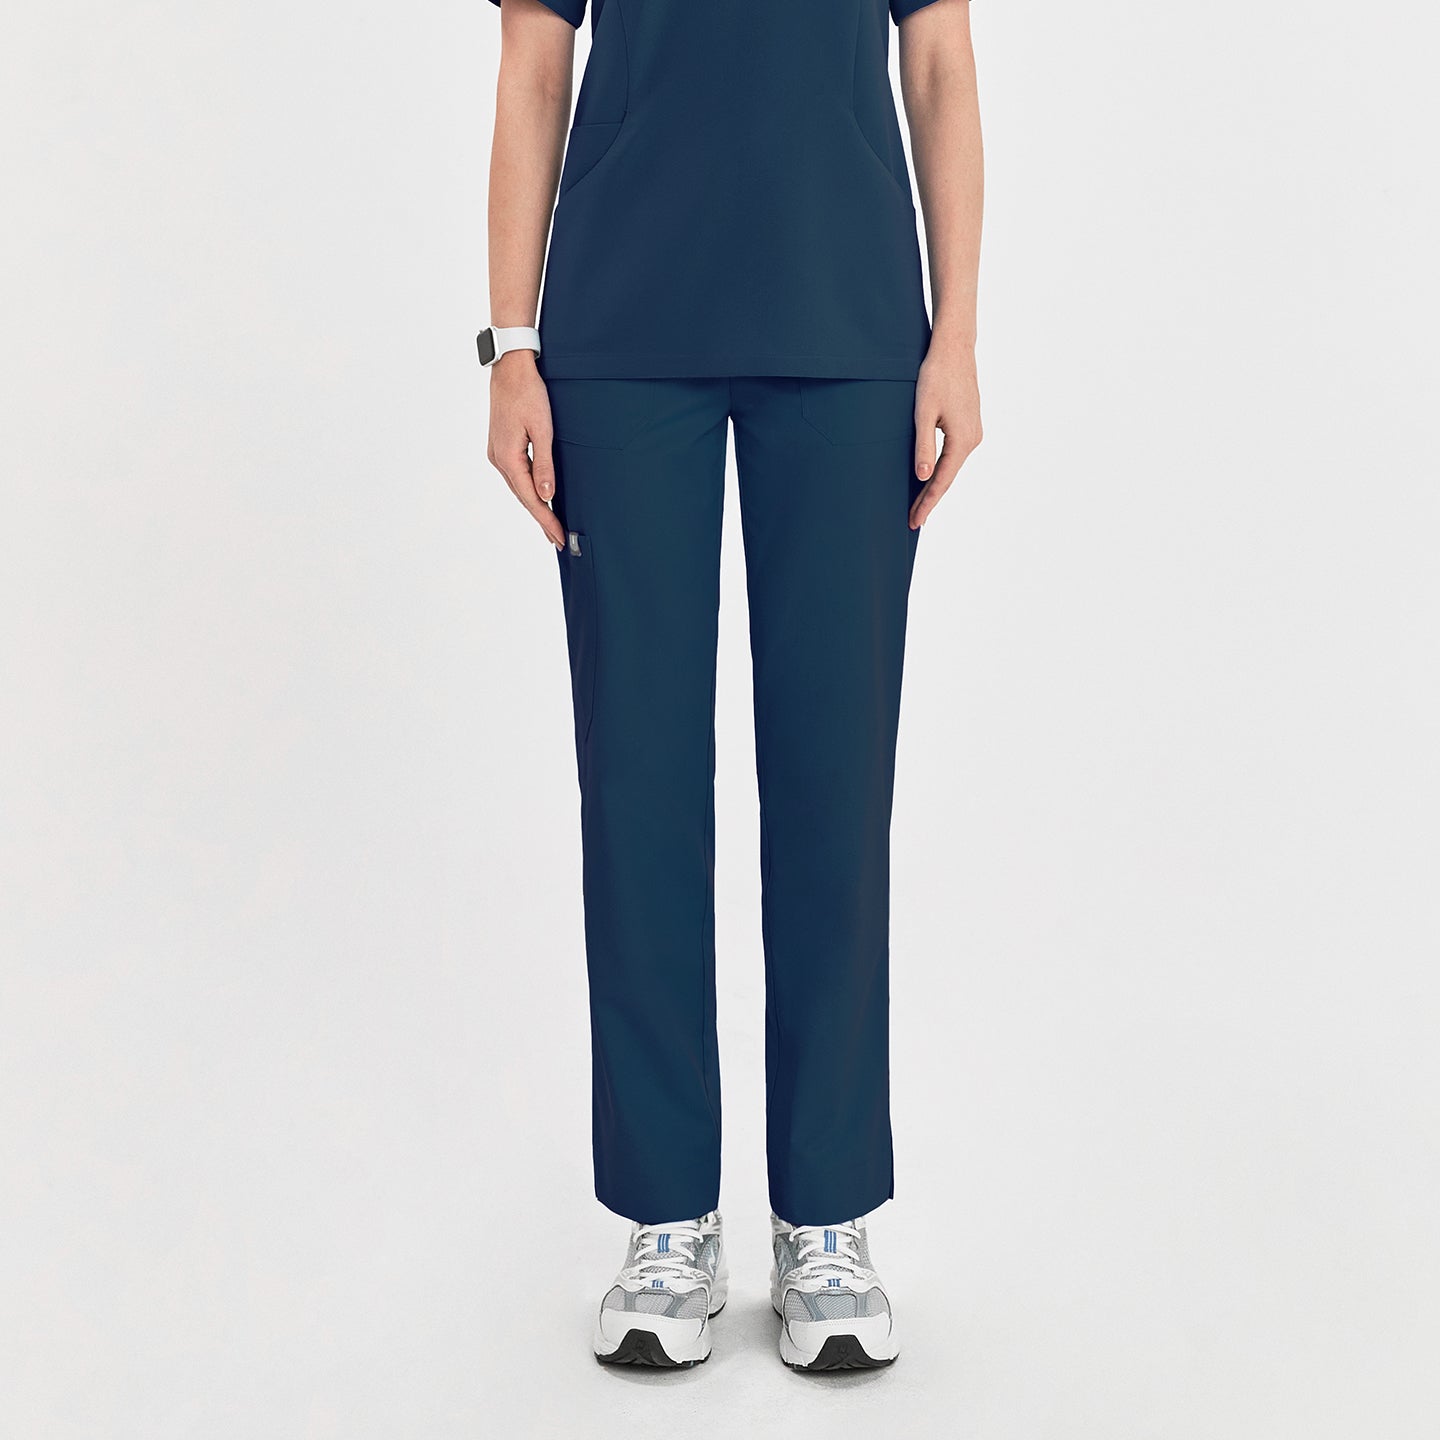 Woman wearing dark blue zipper slit scrub pants, shown from the front. Her hands are relaxed at her sides, showcasing the pants' straight-leg design,Dark Blue